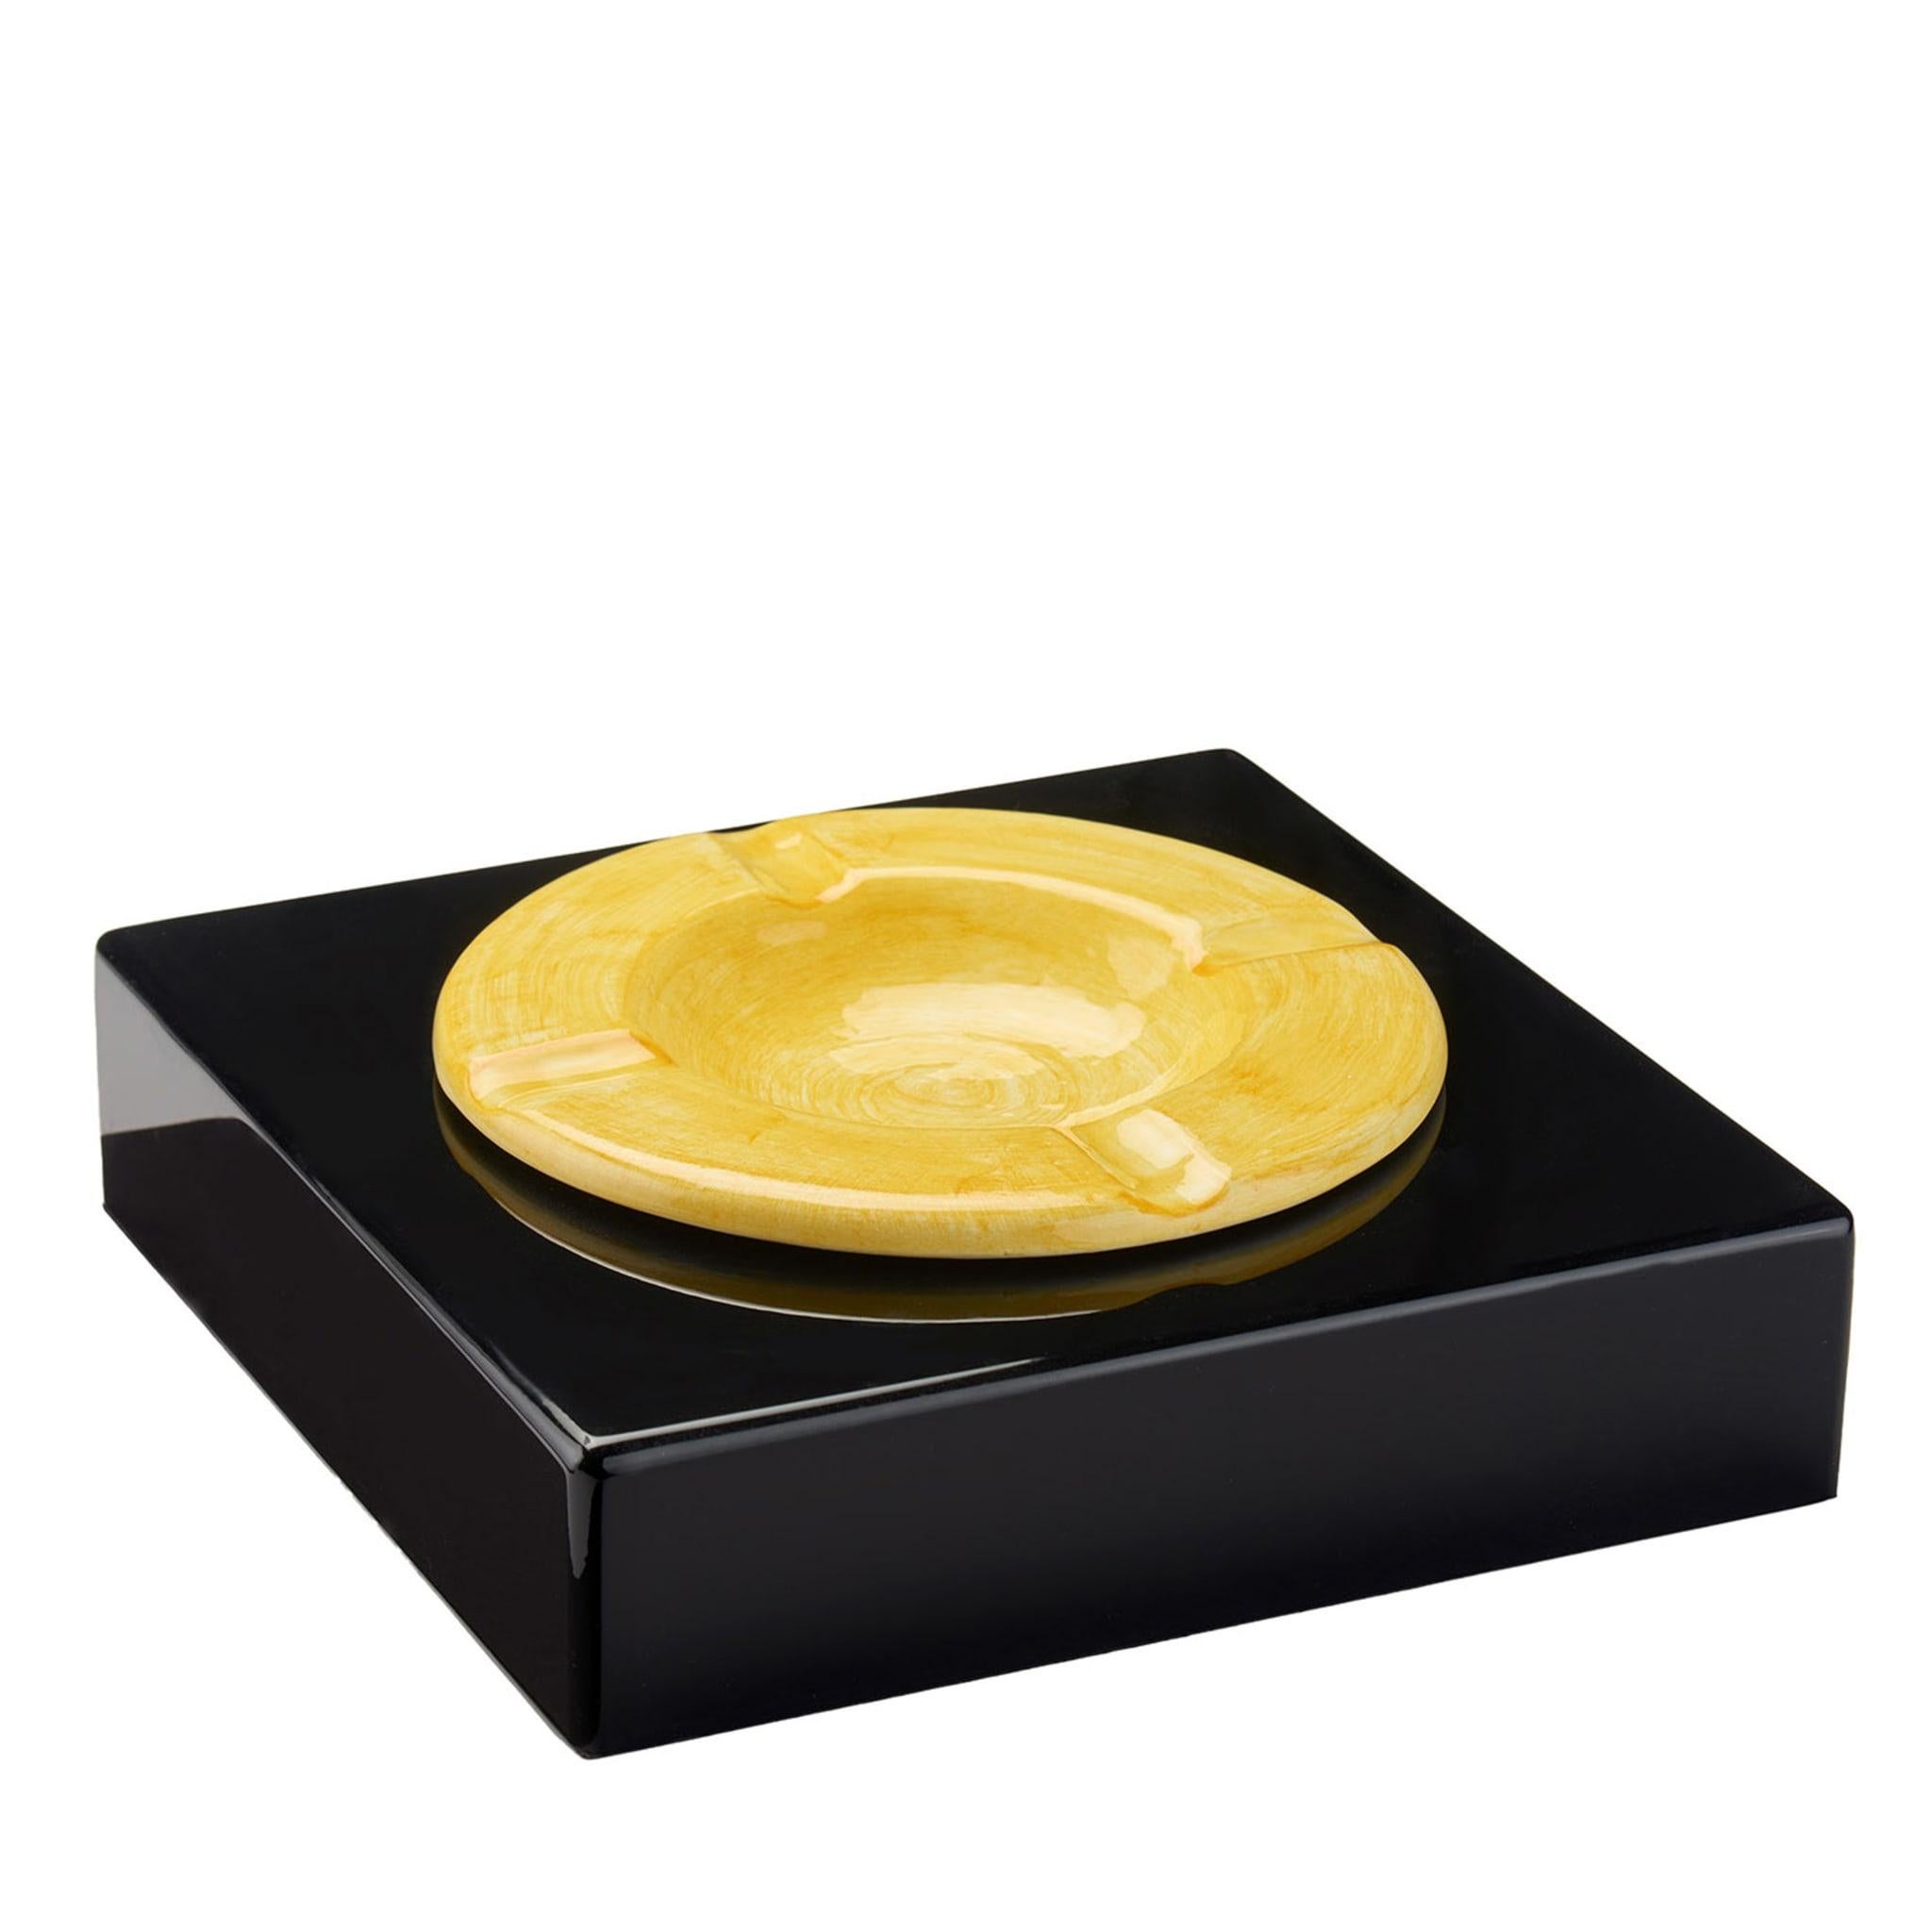 Turning an everyday object into a refined icon of contemporary design, this ashtray is a sublime showcase of artisanal craftsmanship. It features a round classic shape, handmade of ceramic and painted in a delicate yellow shade, enclosed in a